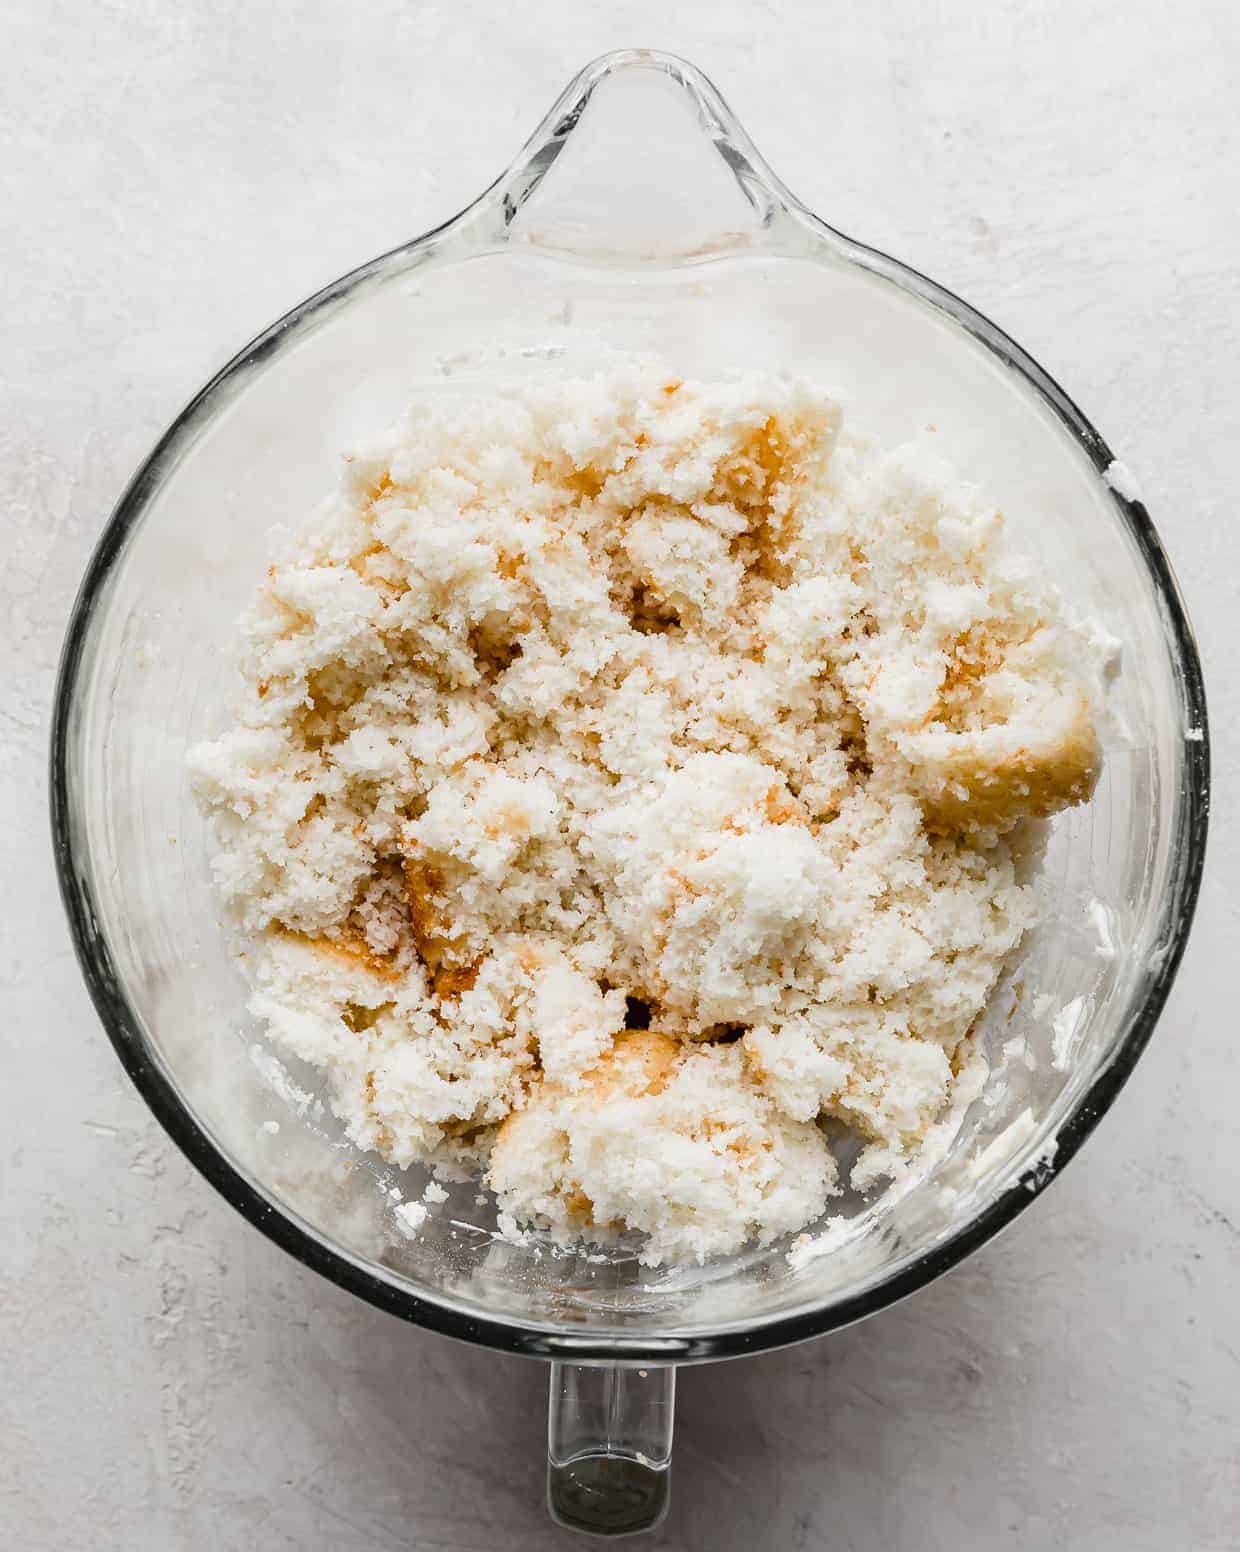 Crumbled white cake in a mixing bowl.